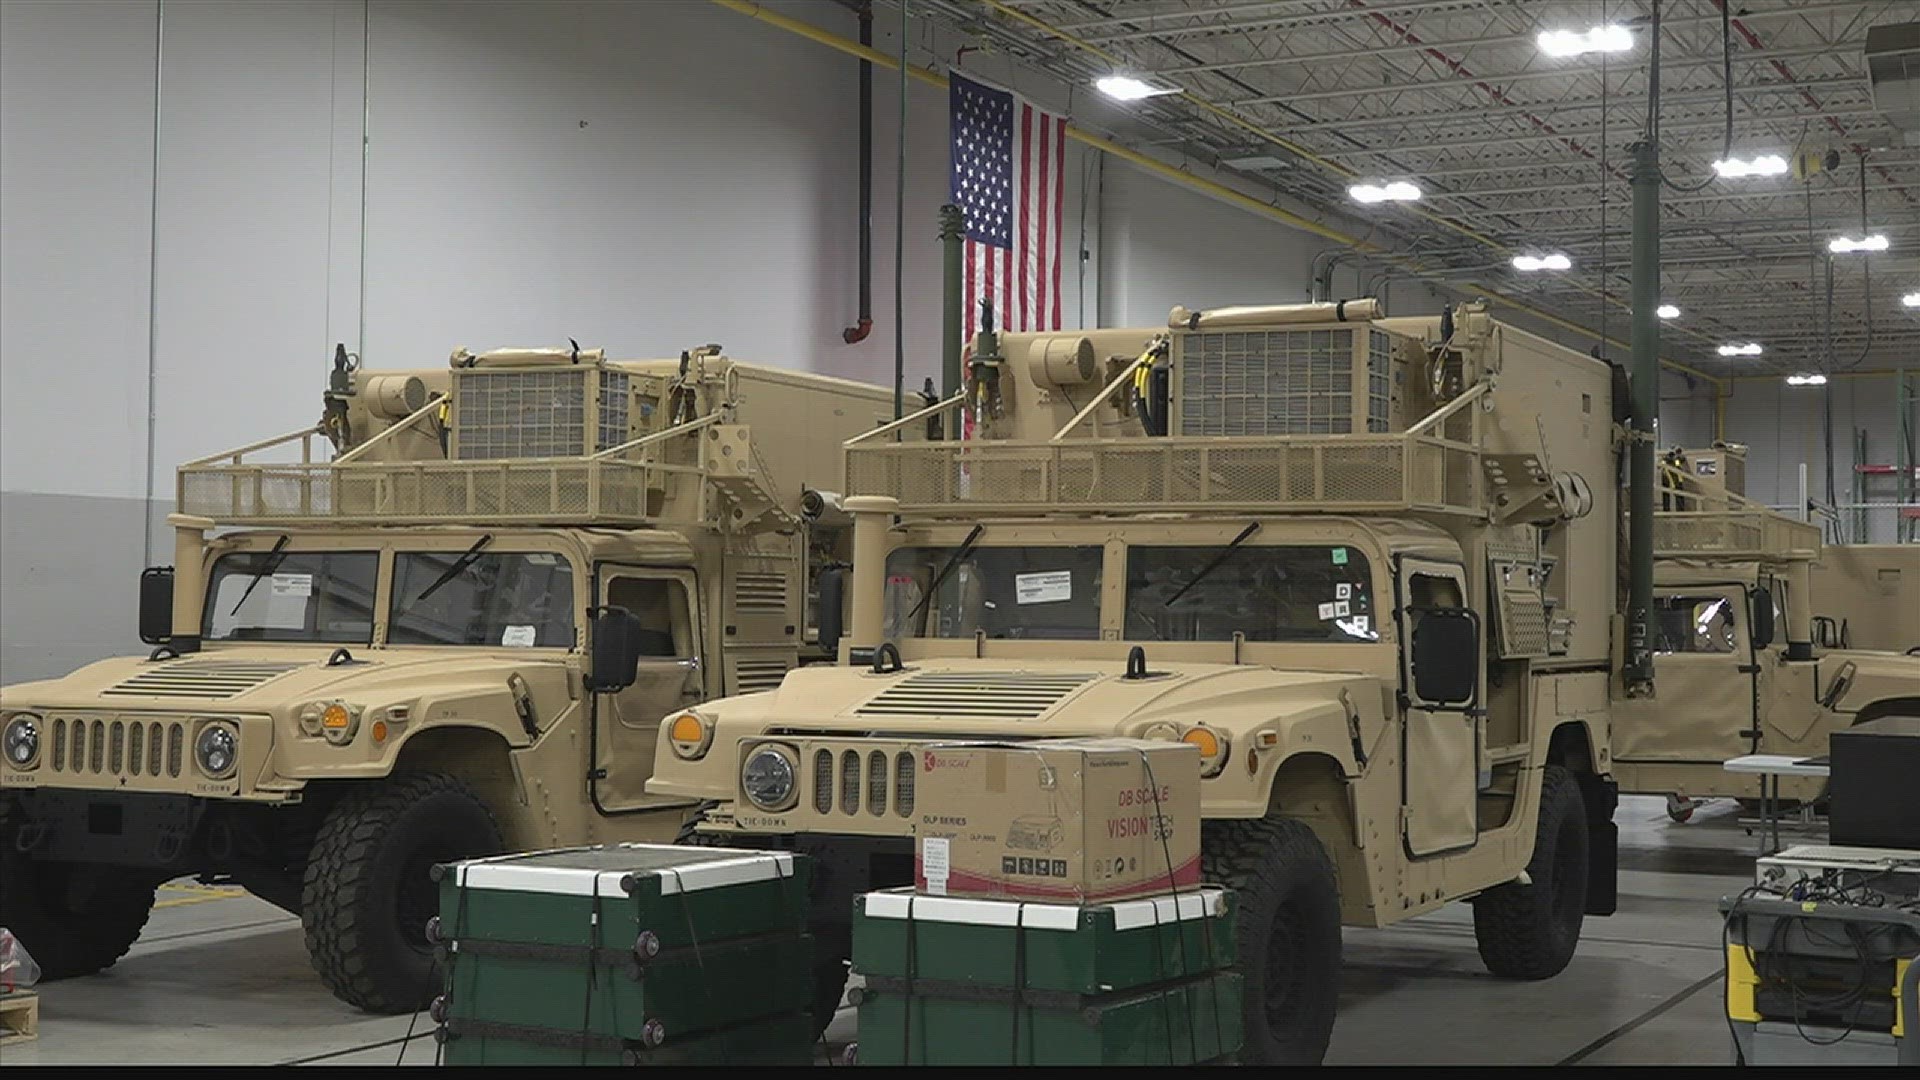 NG officials take you on a tour of parts of the Huntsville facility most civilians don't get to see, to show how your "hard-earned tax dollars are being well-spent."